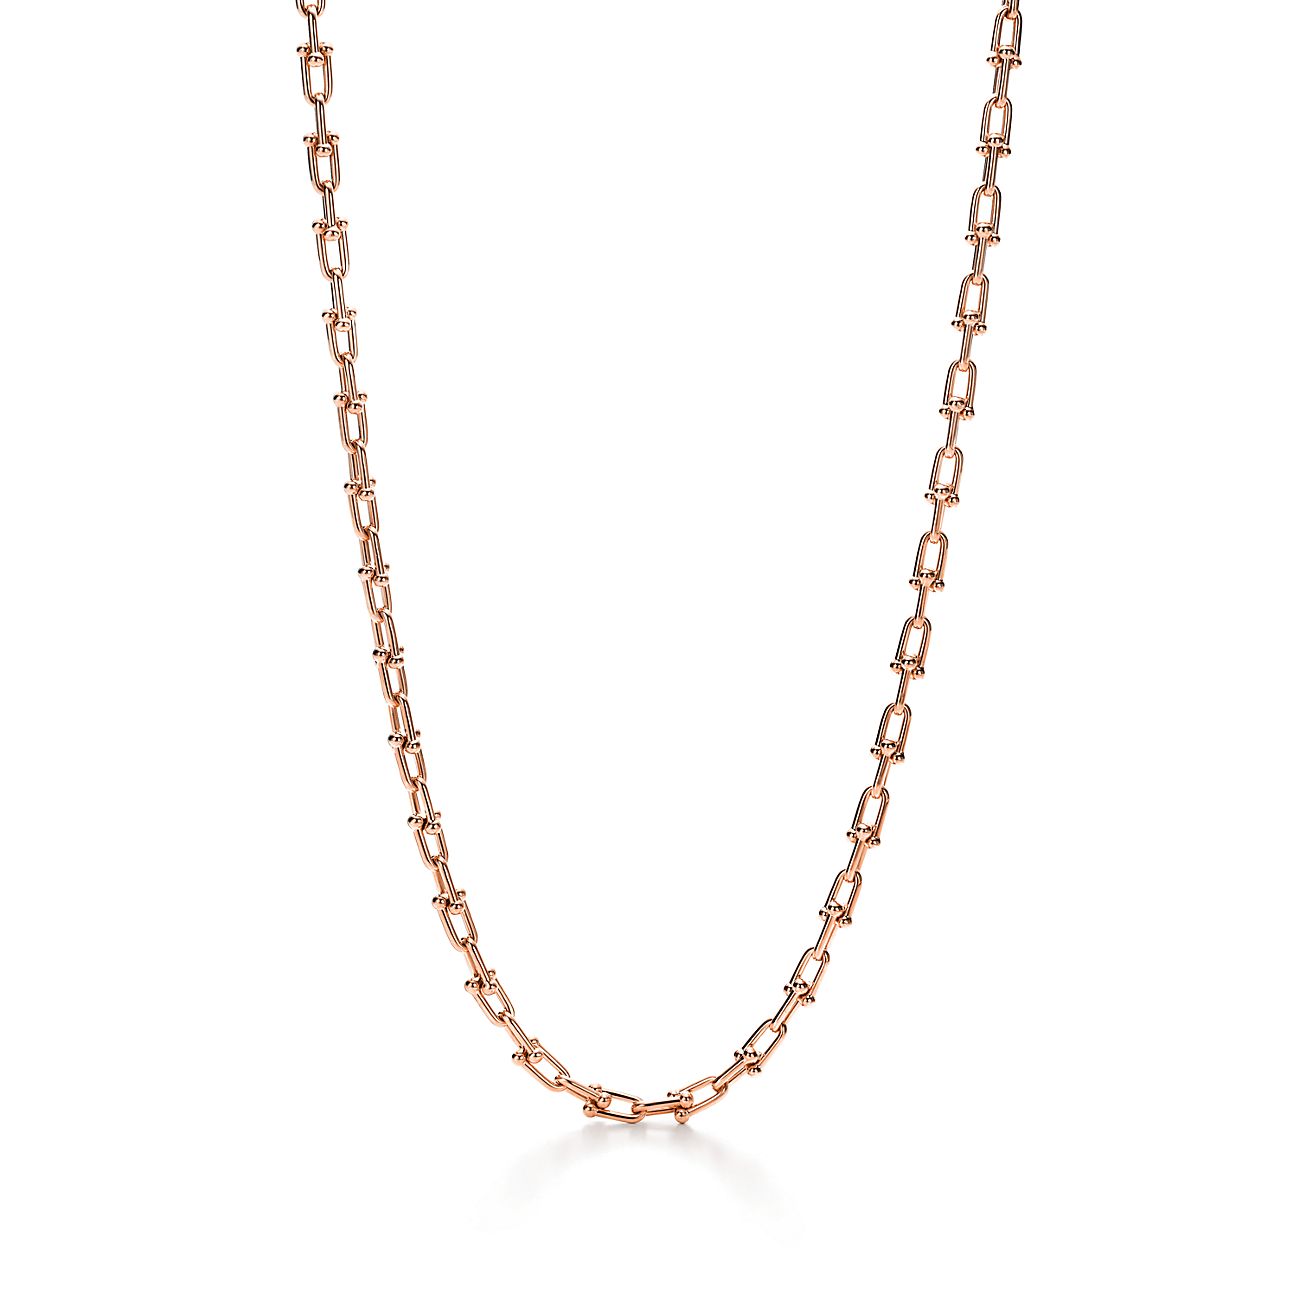 Tiffany HardWear Graduated Link Necklace in Yellow Gold with Pavé Diamonds  | Tiffany & Co.